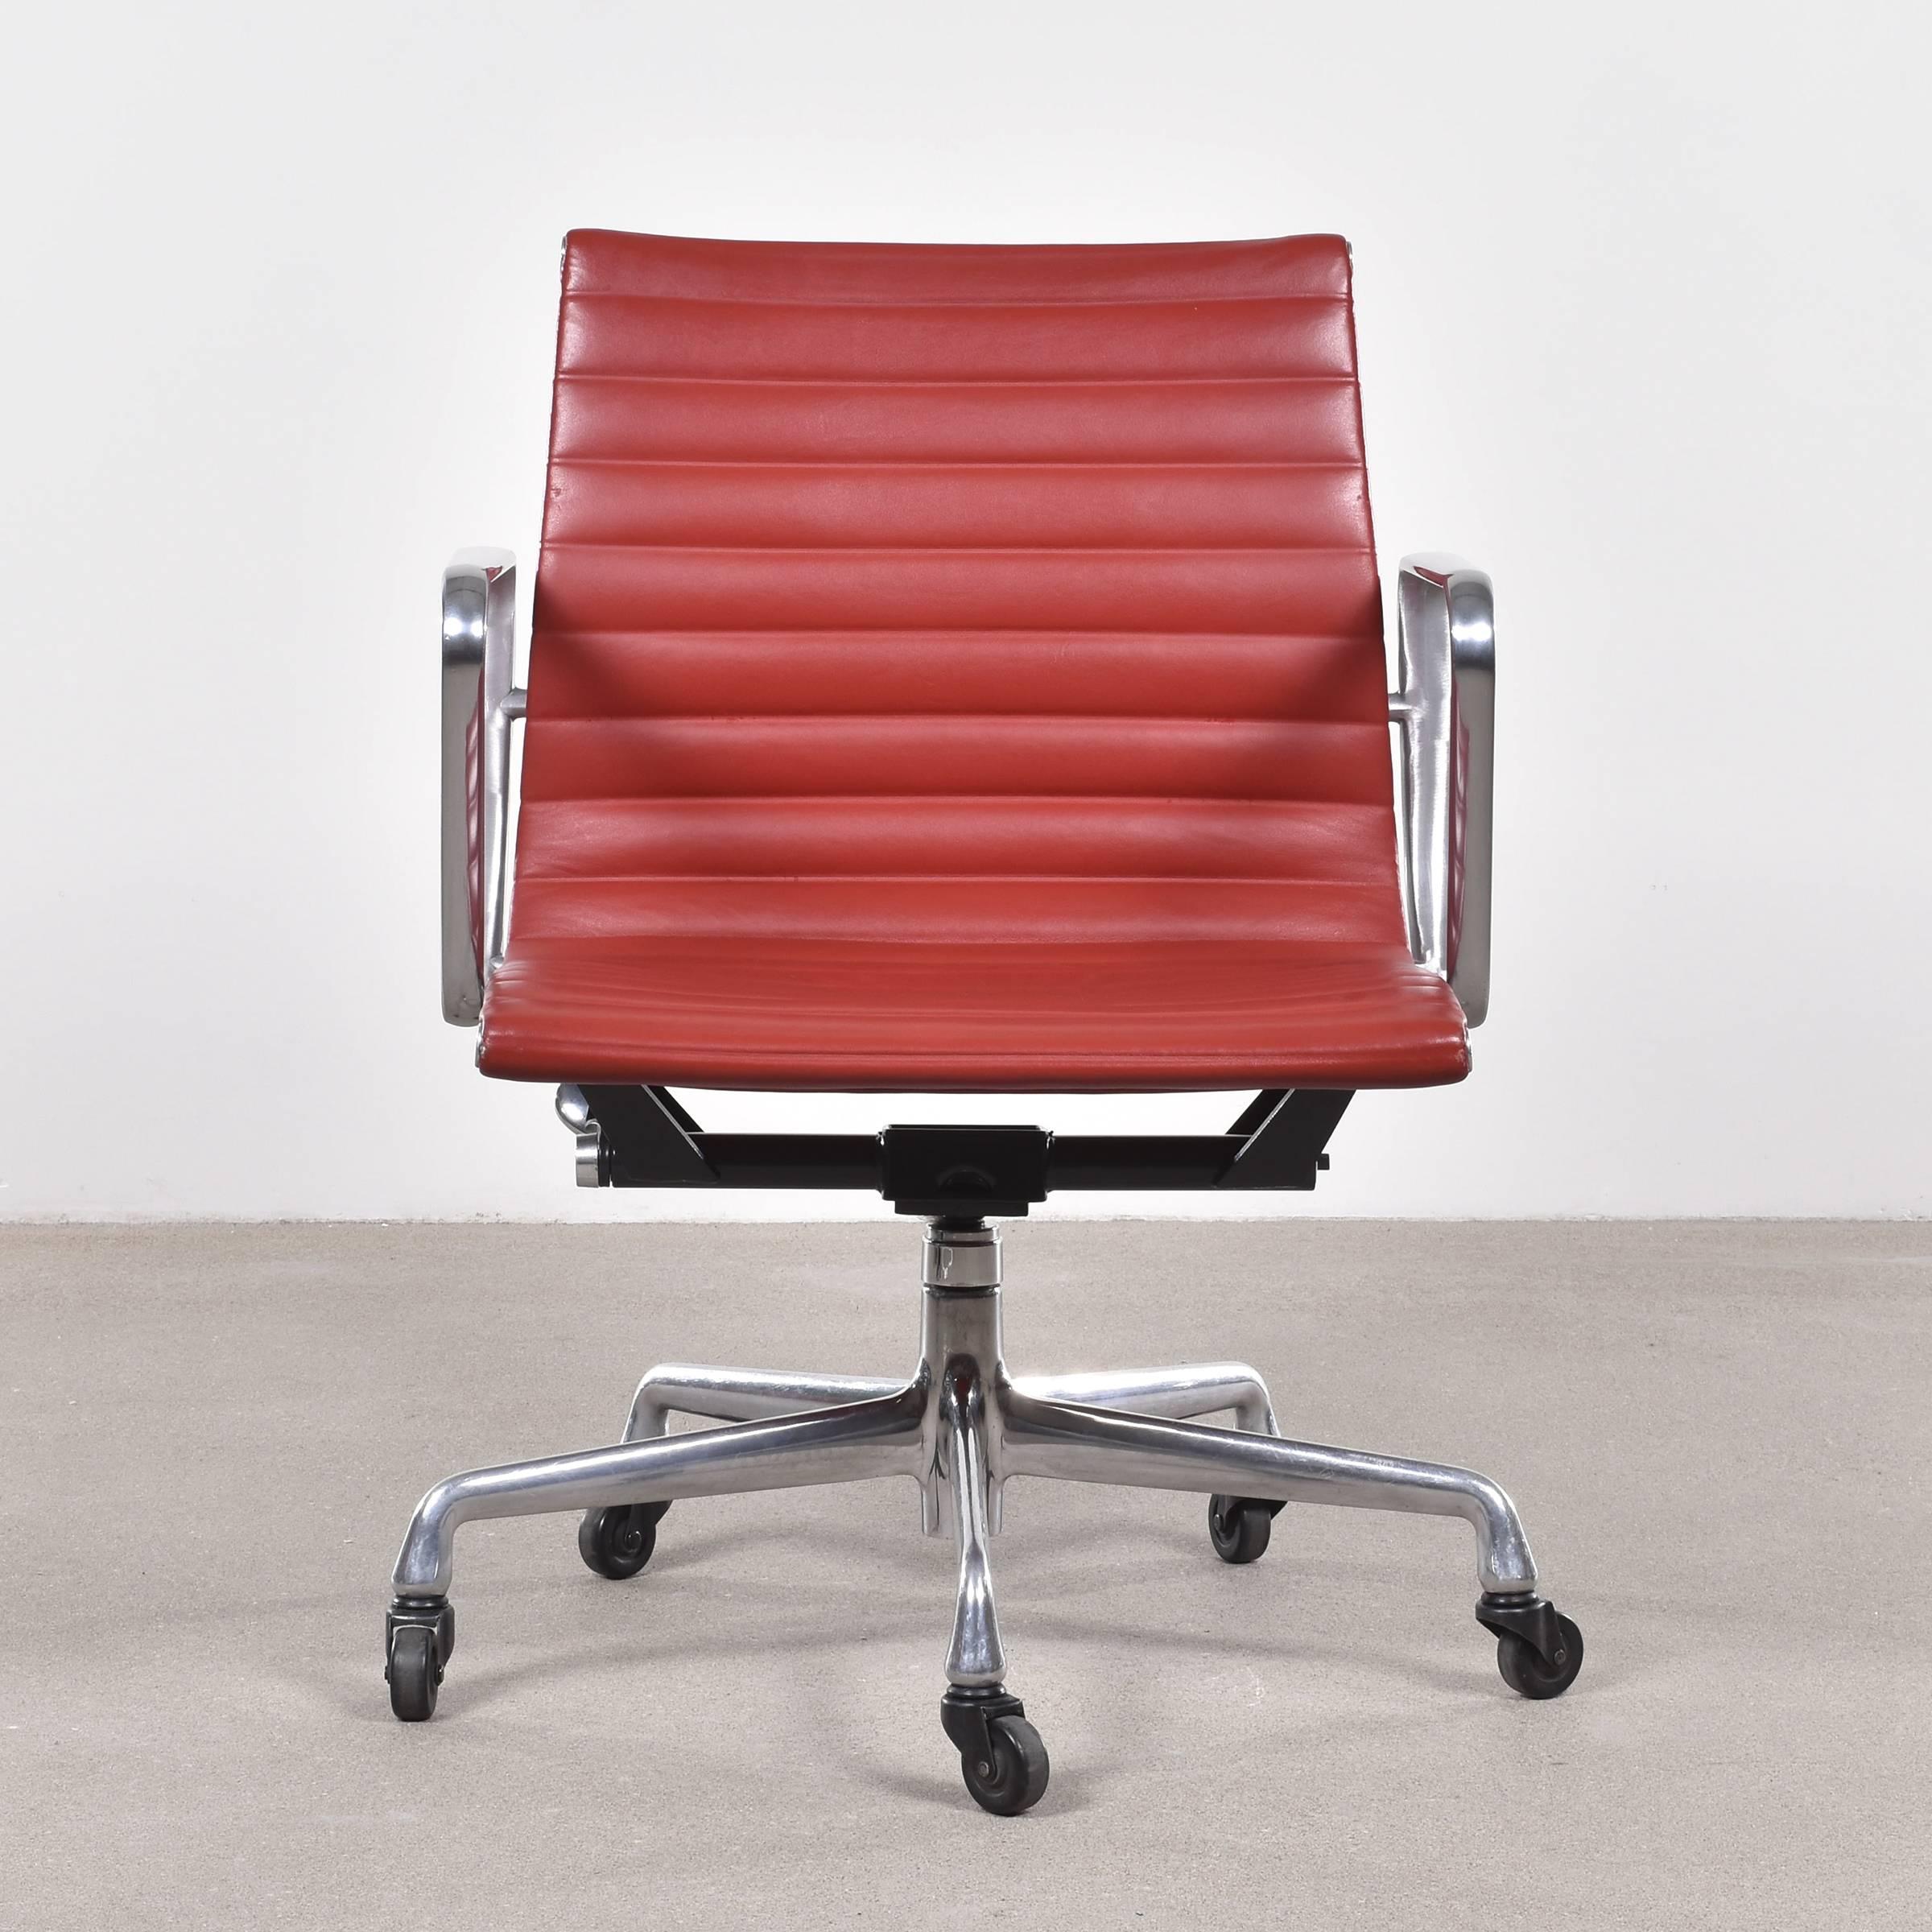 Eames EA335 Management office chair with five-star base, spindle and tilt-swivel mechanism. Very good original condition signed with manufacturer's label. Multiple chairs available.